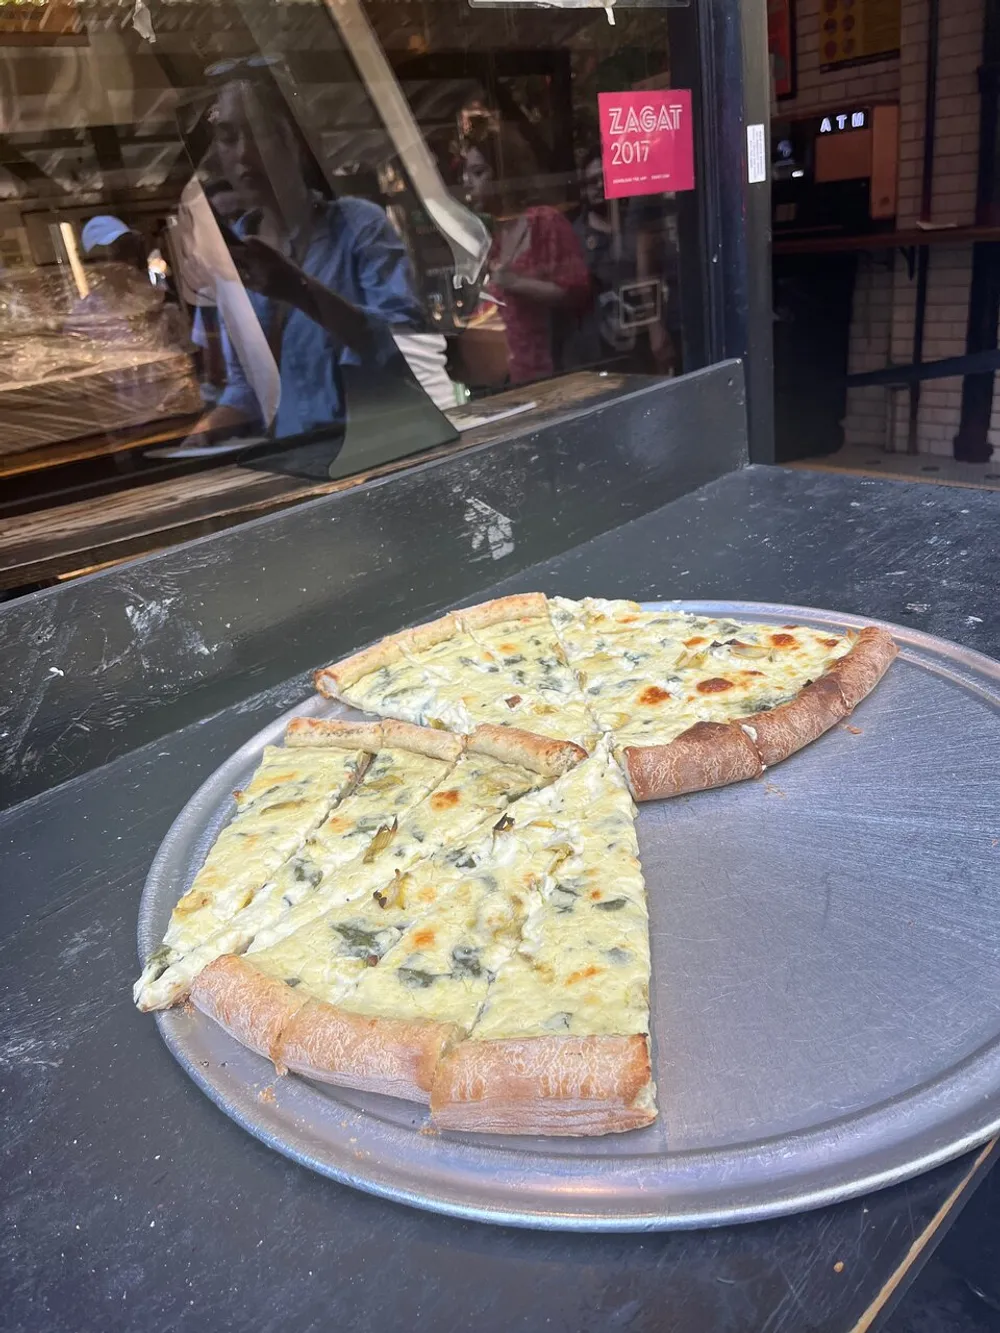 Three slices of white pizza with a variety of toppings sit on a metal pizza tray on a dark countertop with reflections of people visible in the glass window of a pizzeria behind it